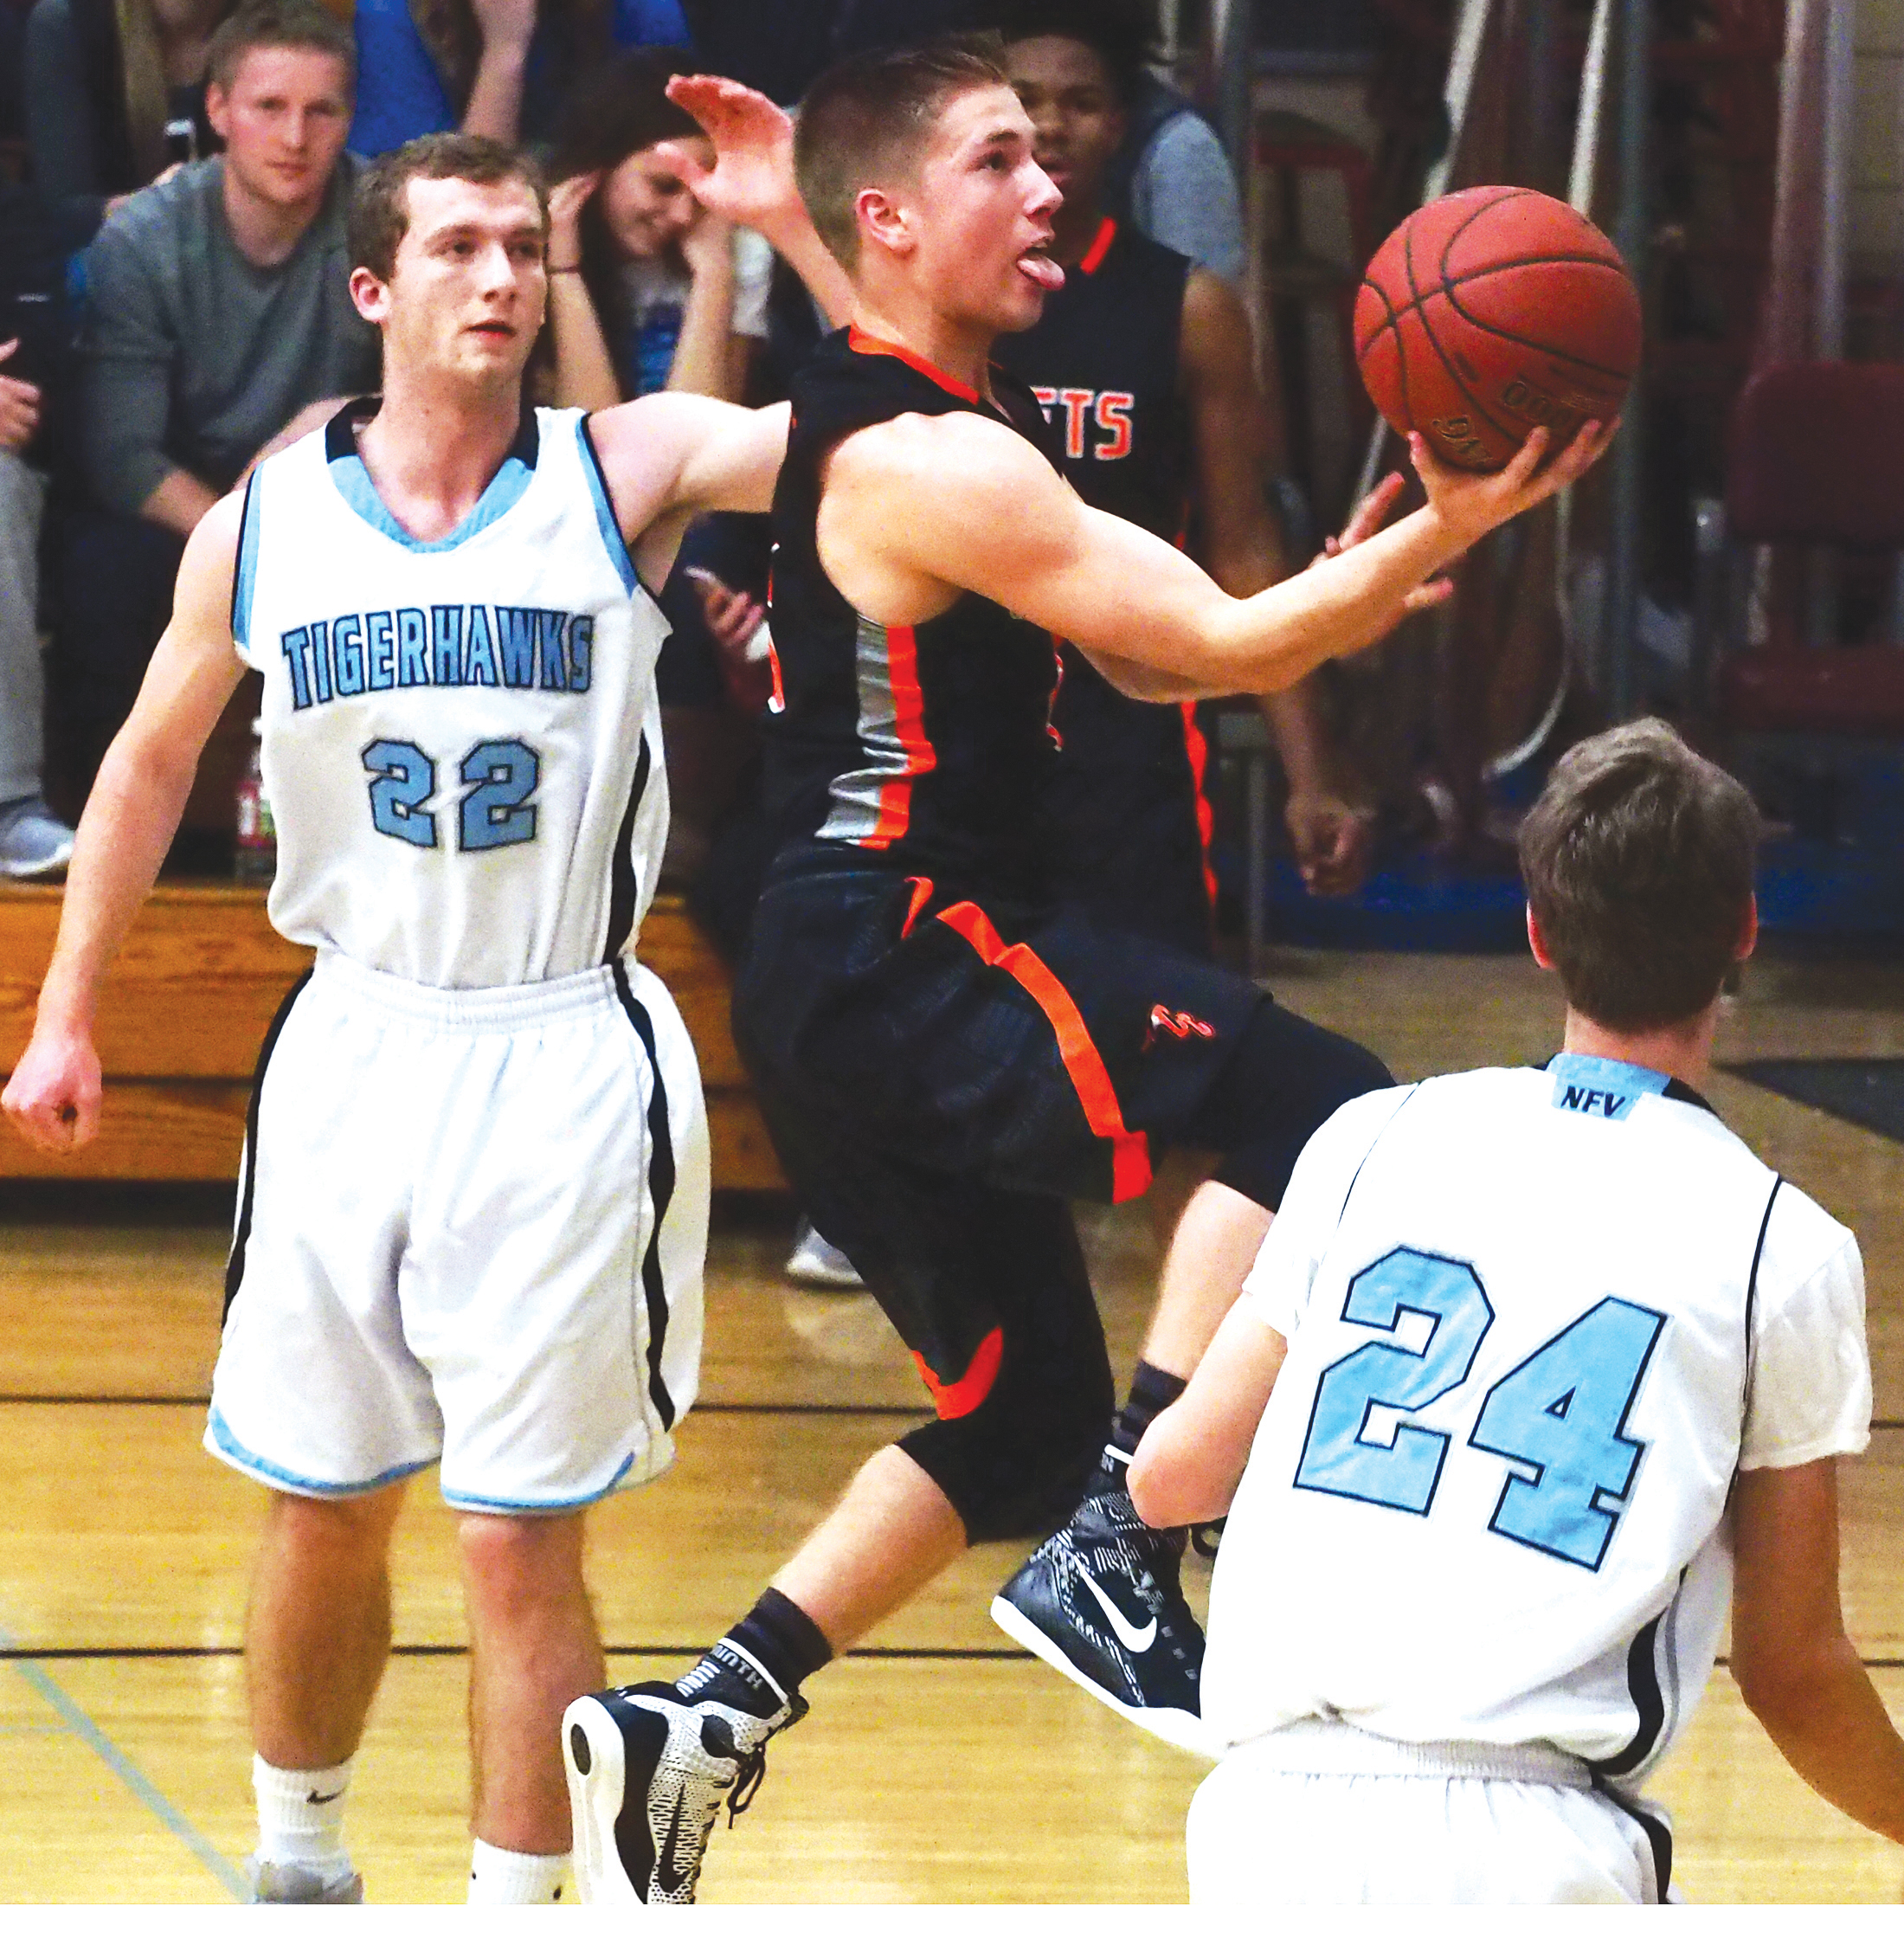 Jack Molstead selected to 3rd All-NEIC basketball first team